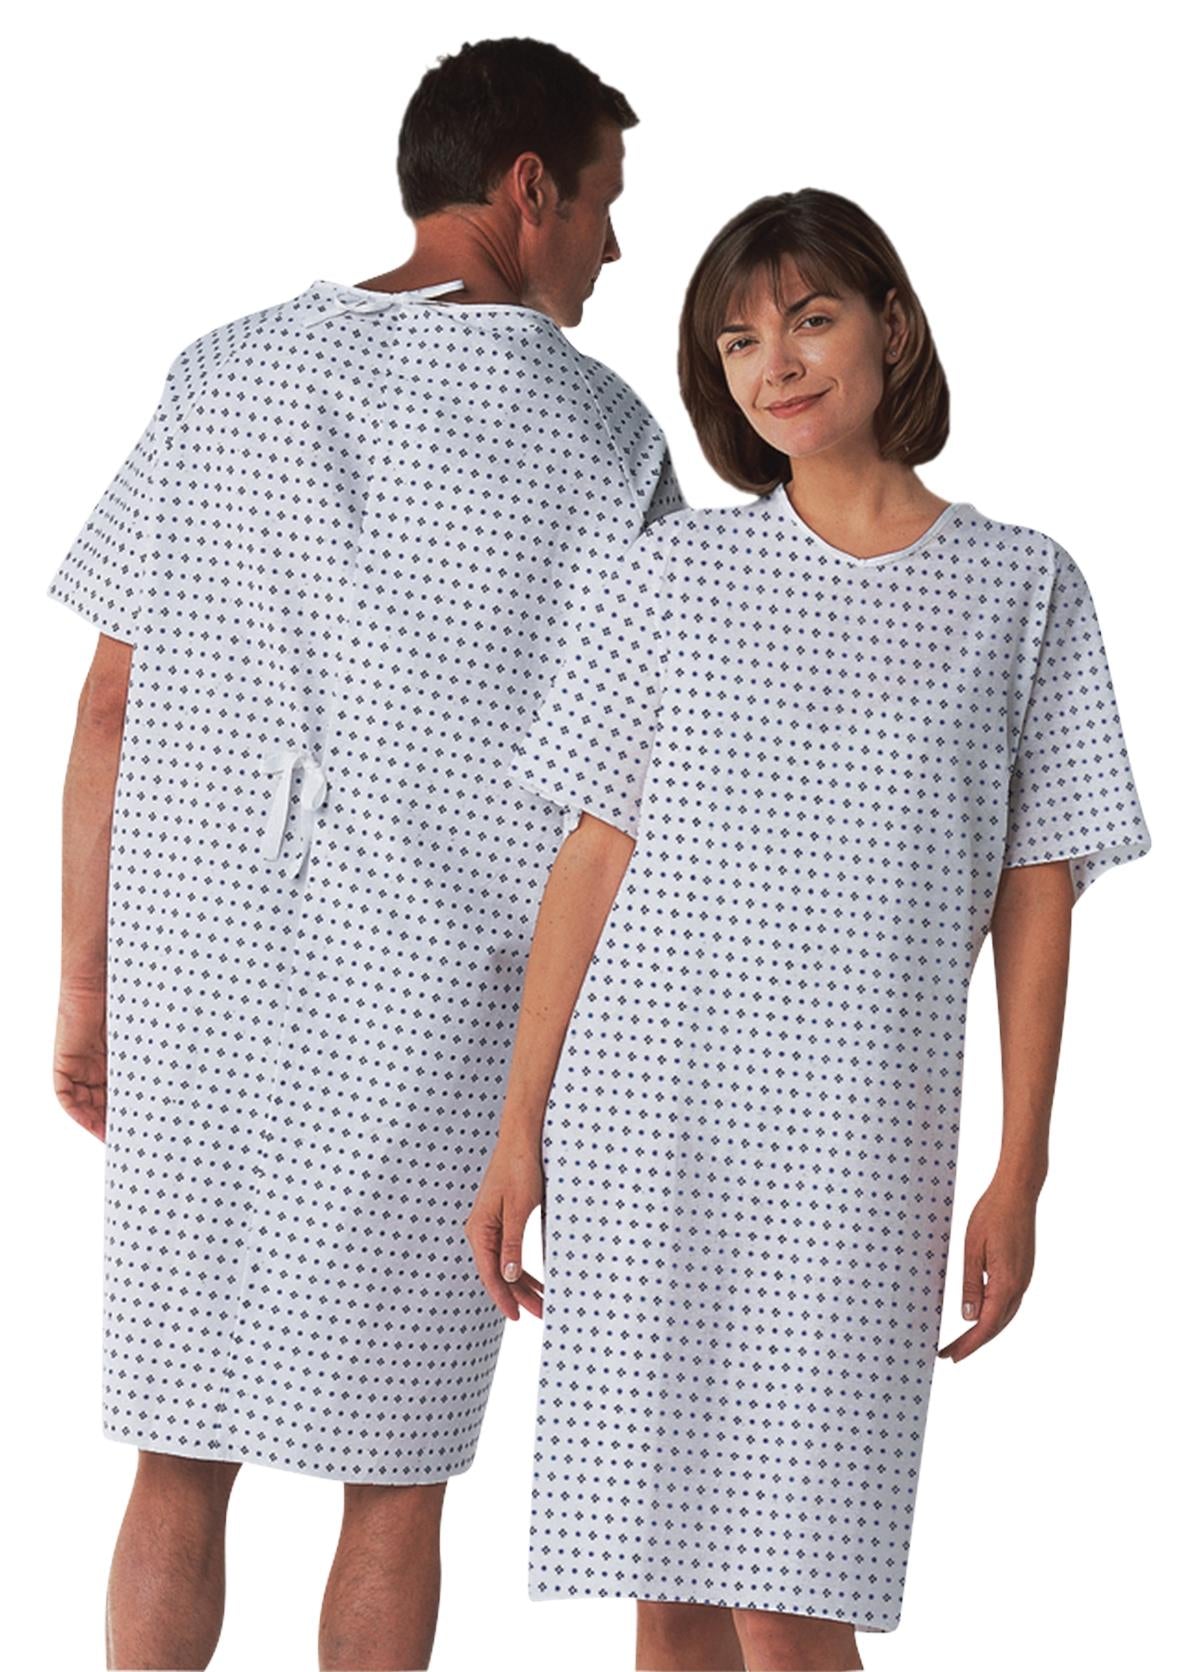 Traditional Patient Gown with Straight Back & Ties, One Size Fits Most